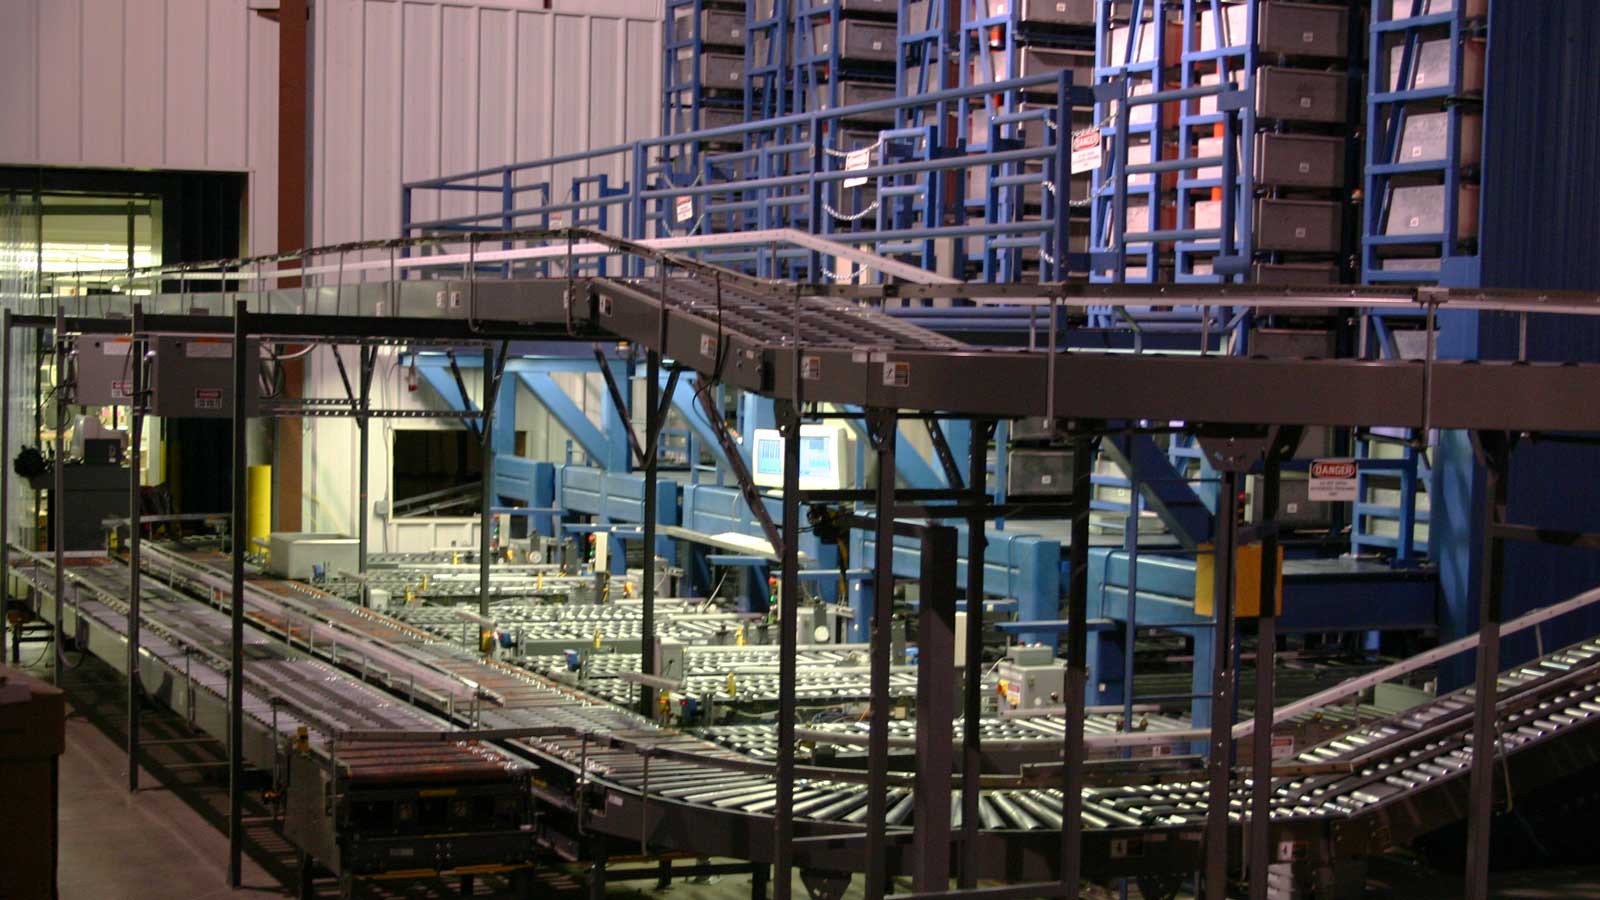 Automated conveyor and storage system with sorting bins in facility.